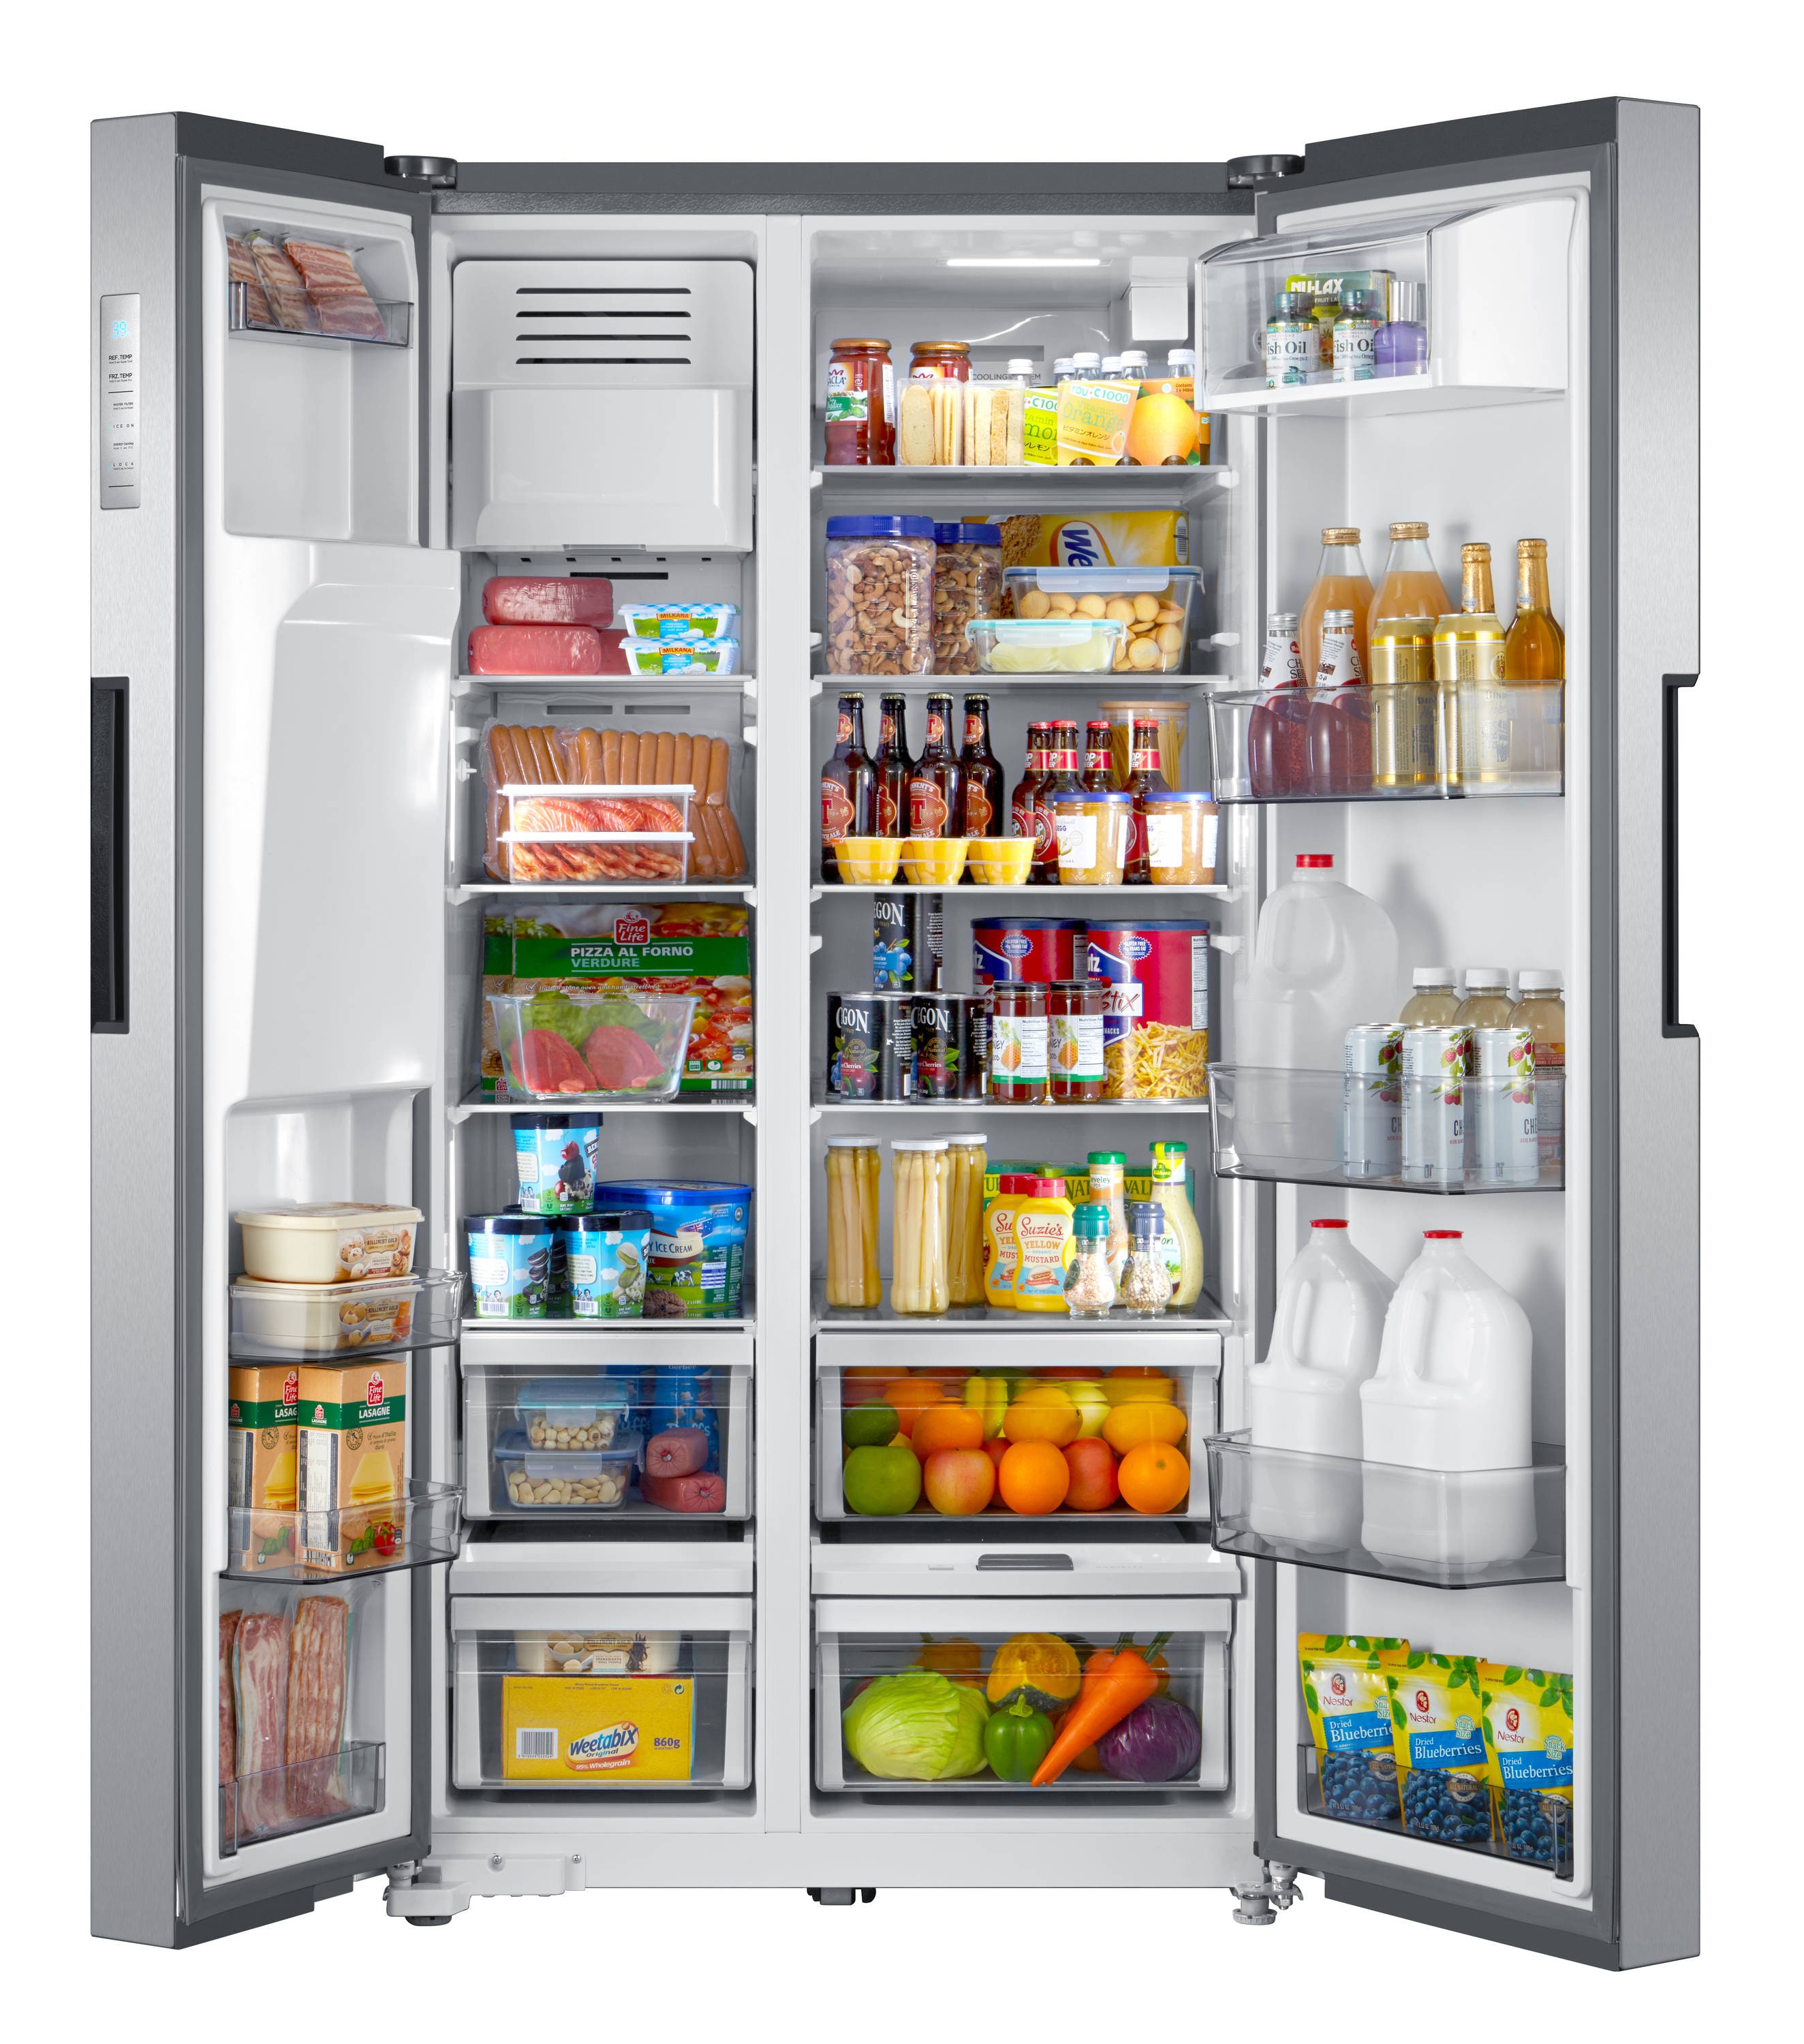 Midea MRS26D5AST Review: Not a worthwhile side-by-side refrigerator -  Reviewed